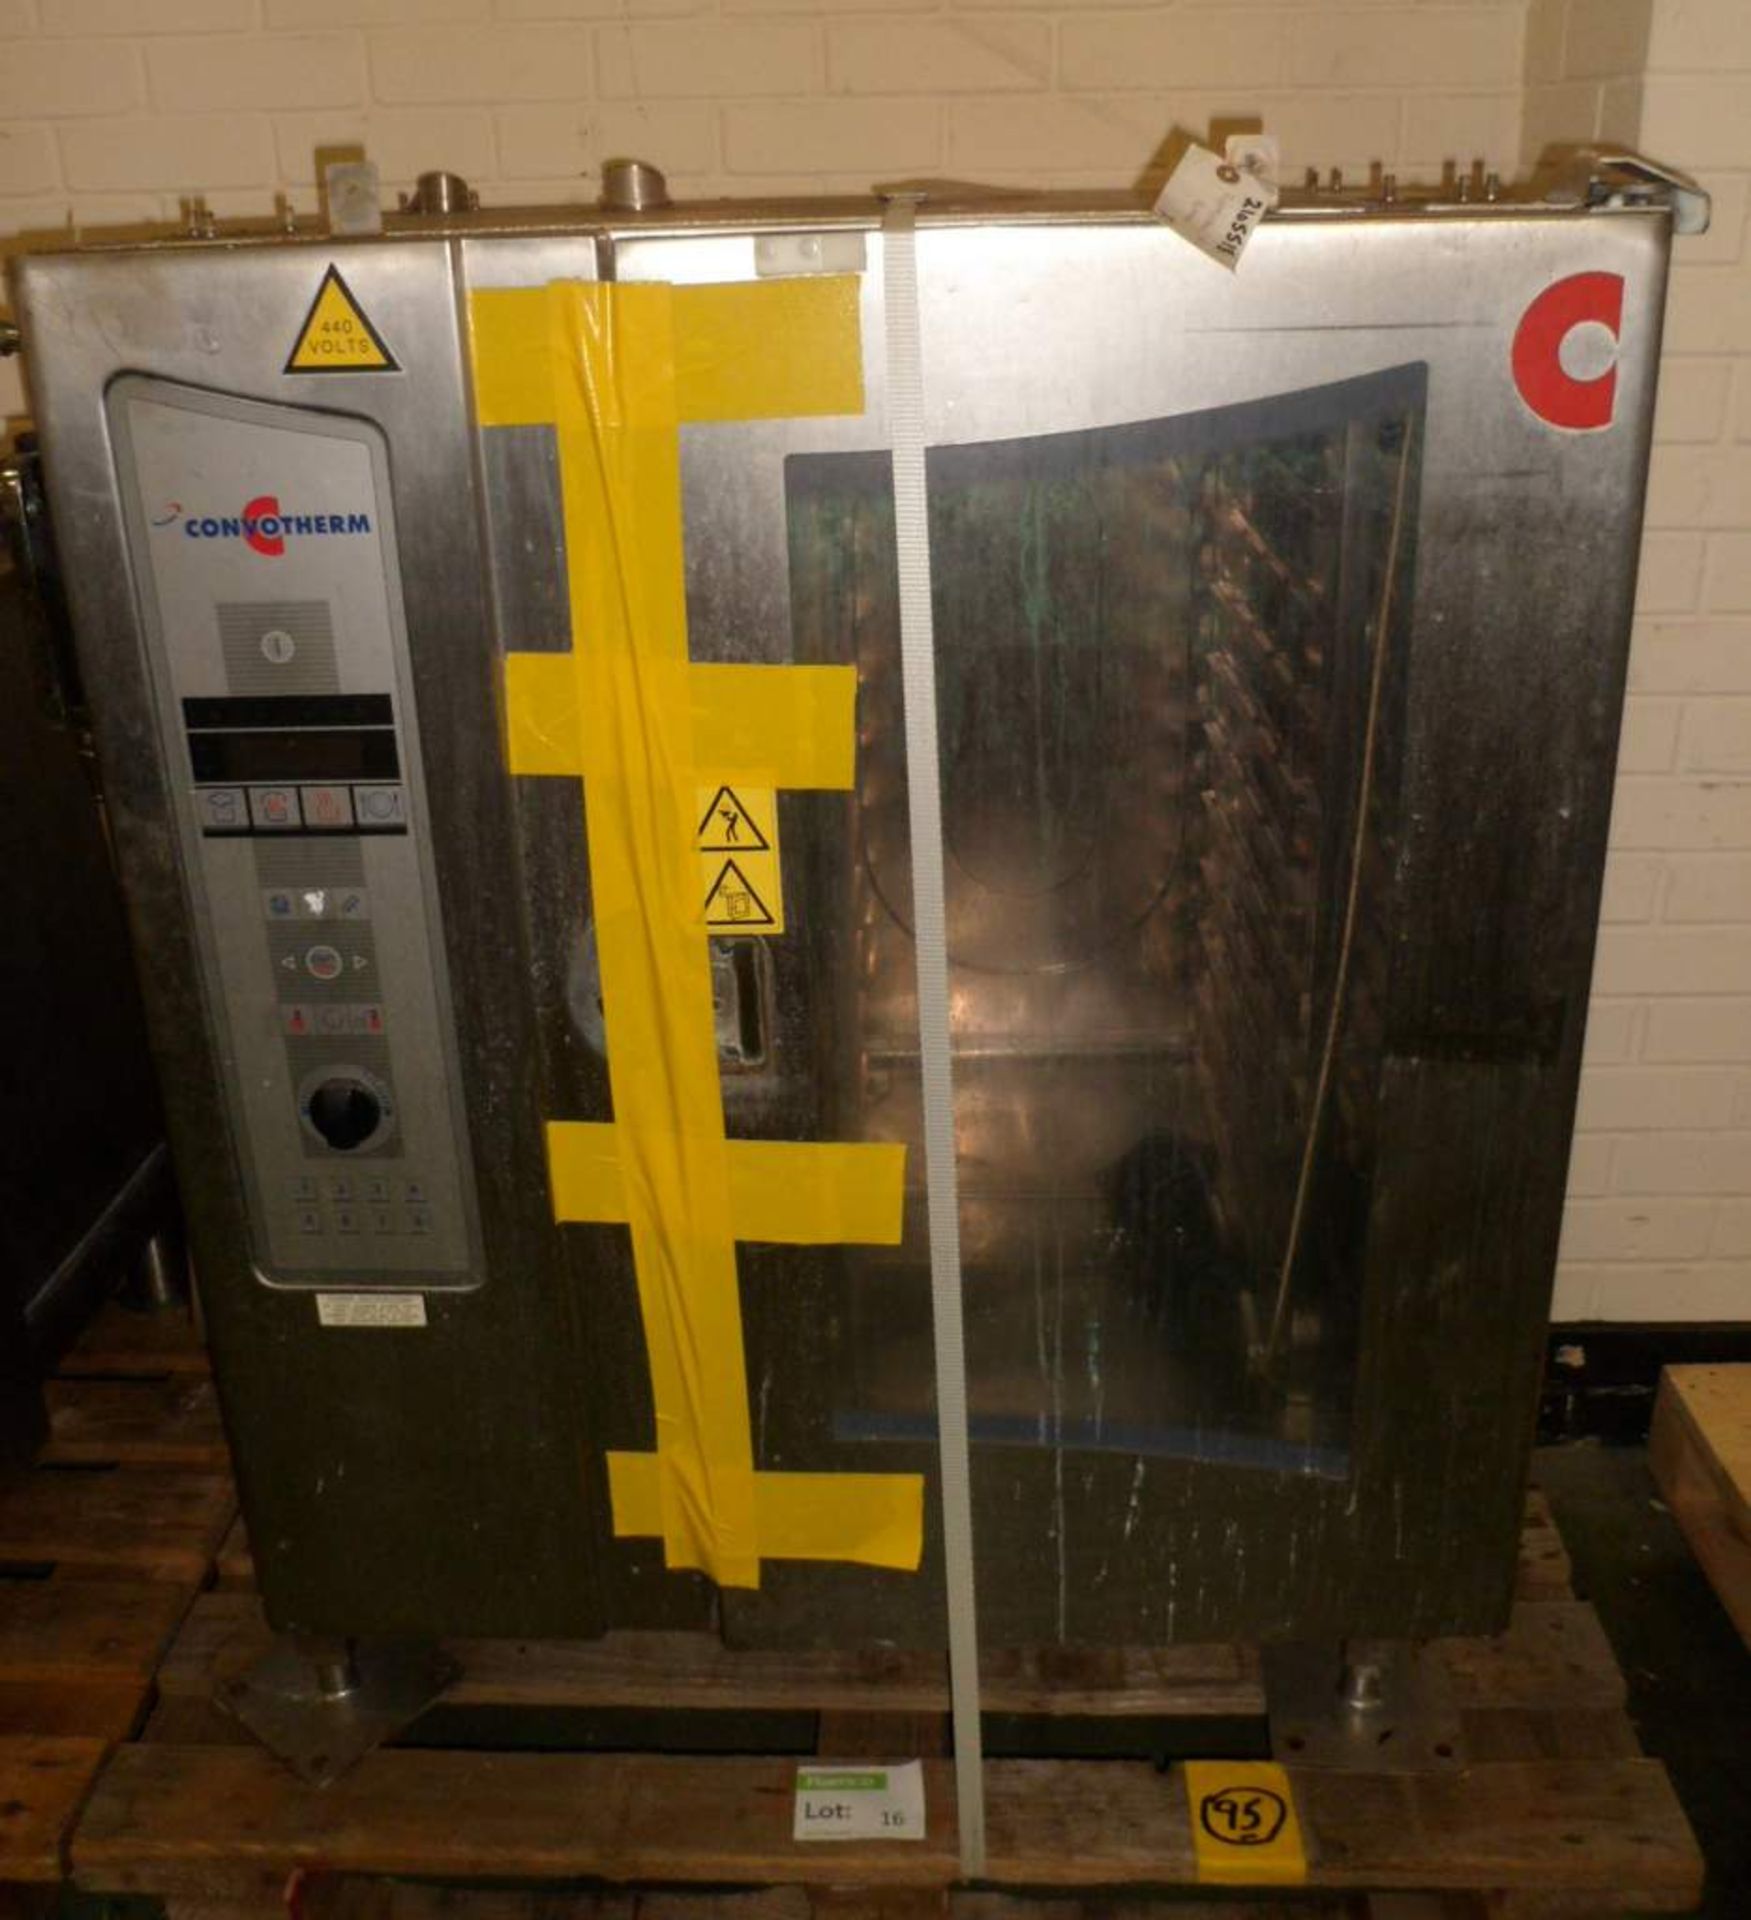 Convotherm oven type OEB 10.10 spares or repairs